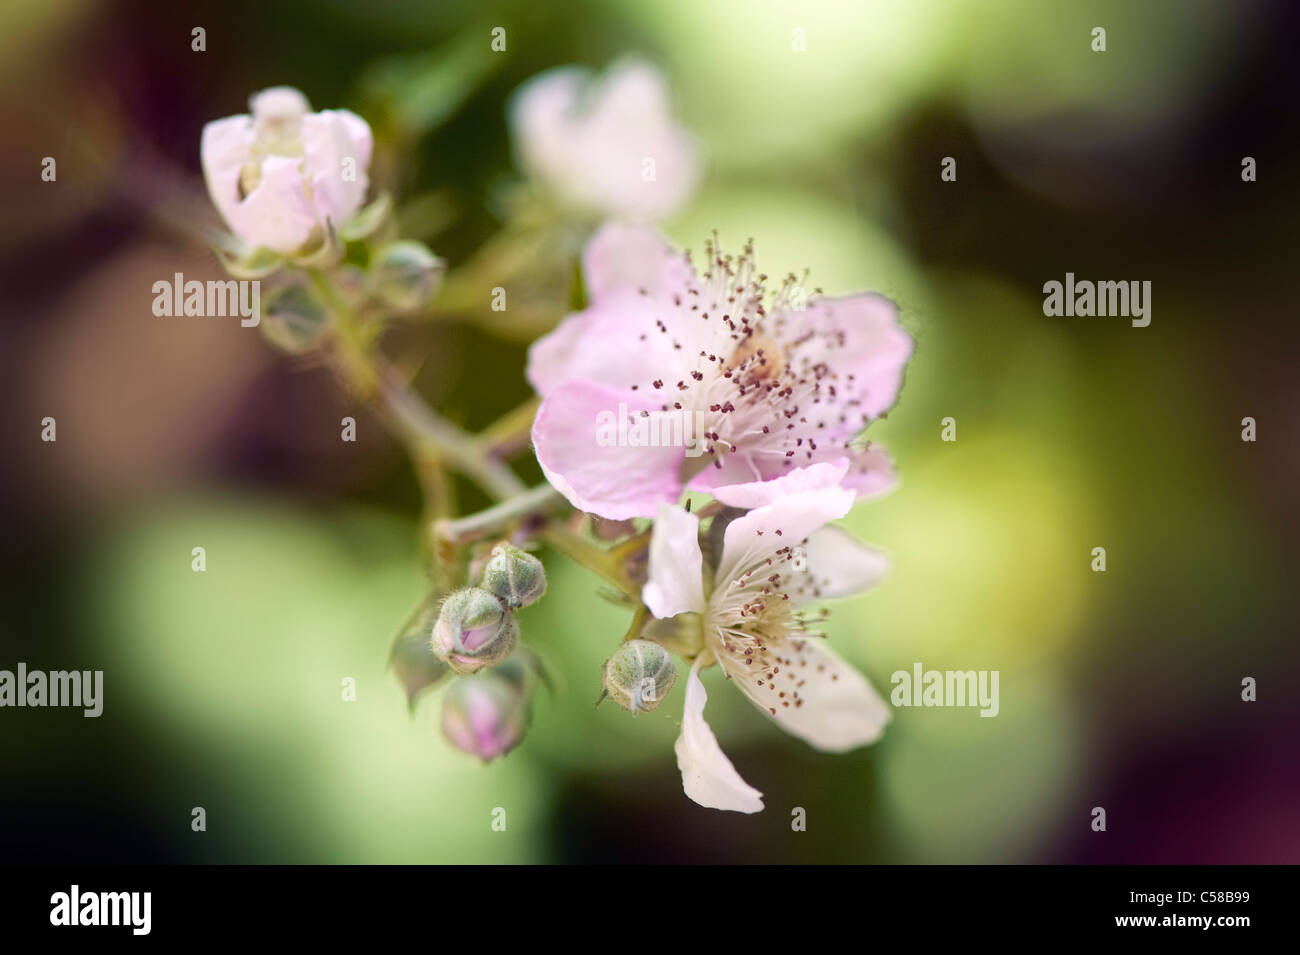 Close-up image of the summer flowering Bramble or Blackberry flowers which can be soft pink or white, taken against a soft background. Stock Photo